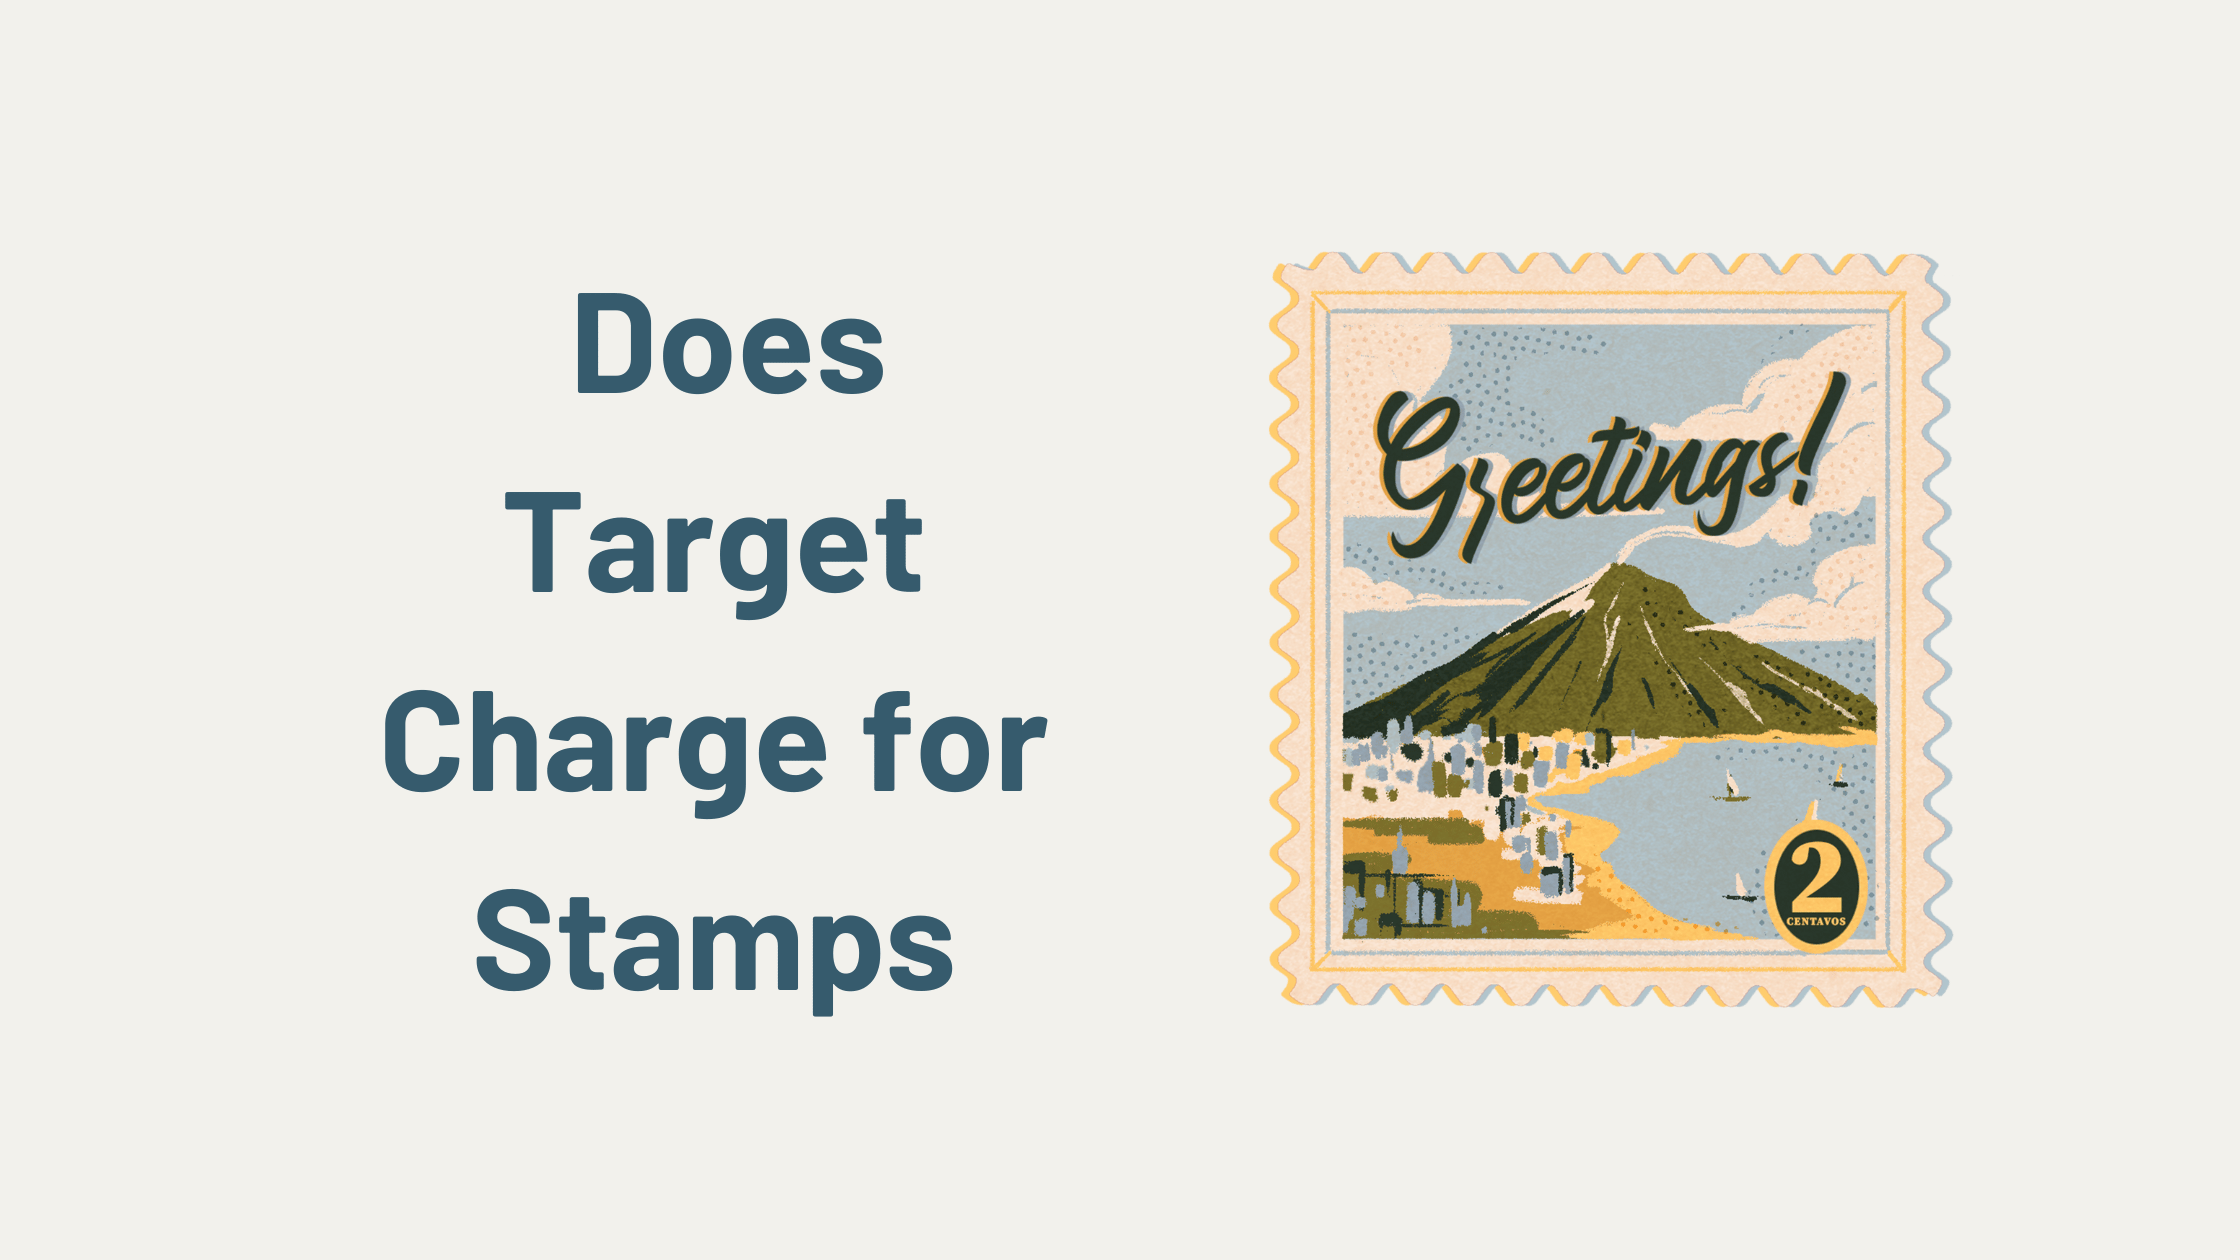 How Much Does Target Charge for Stamps